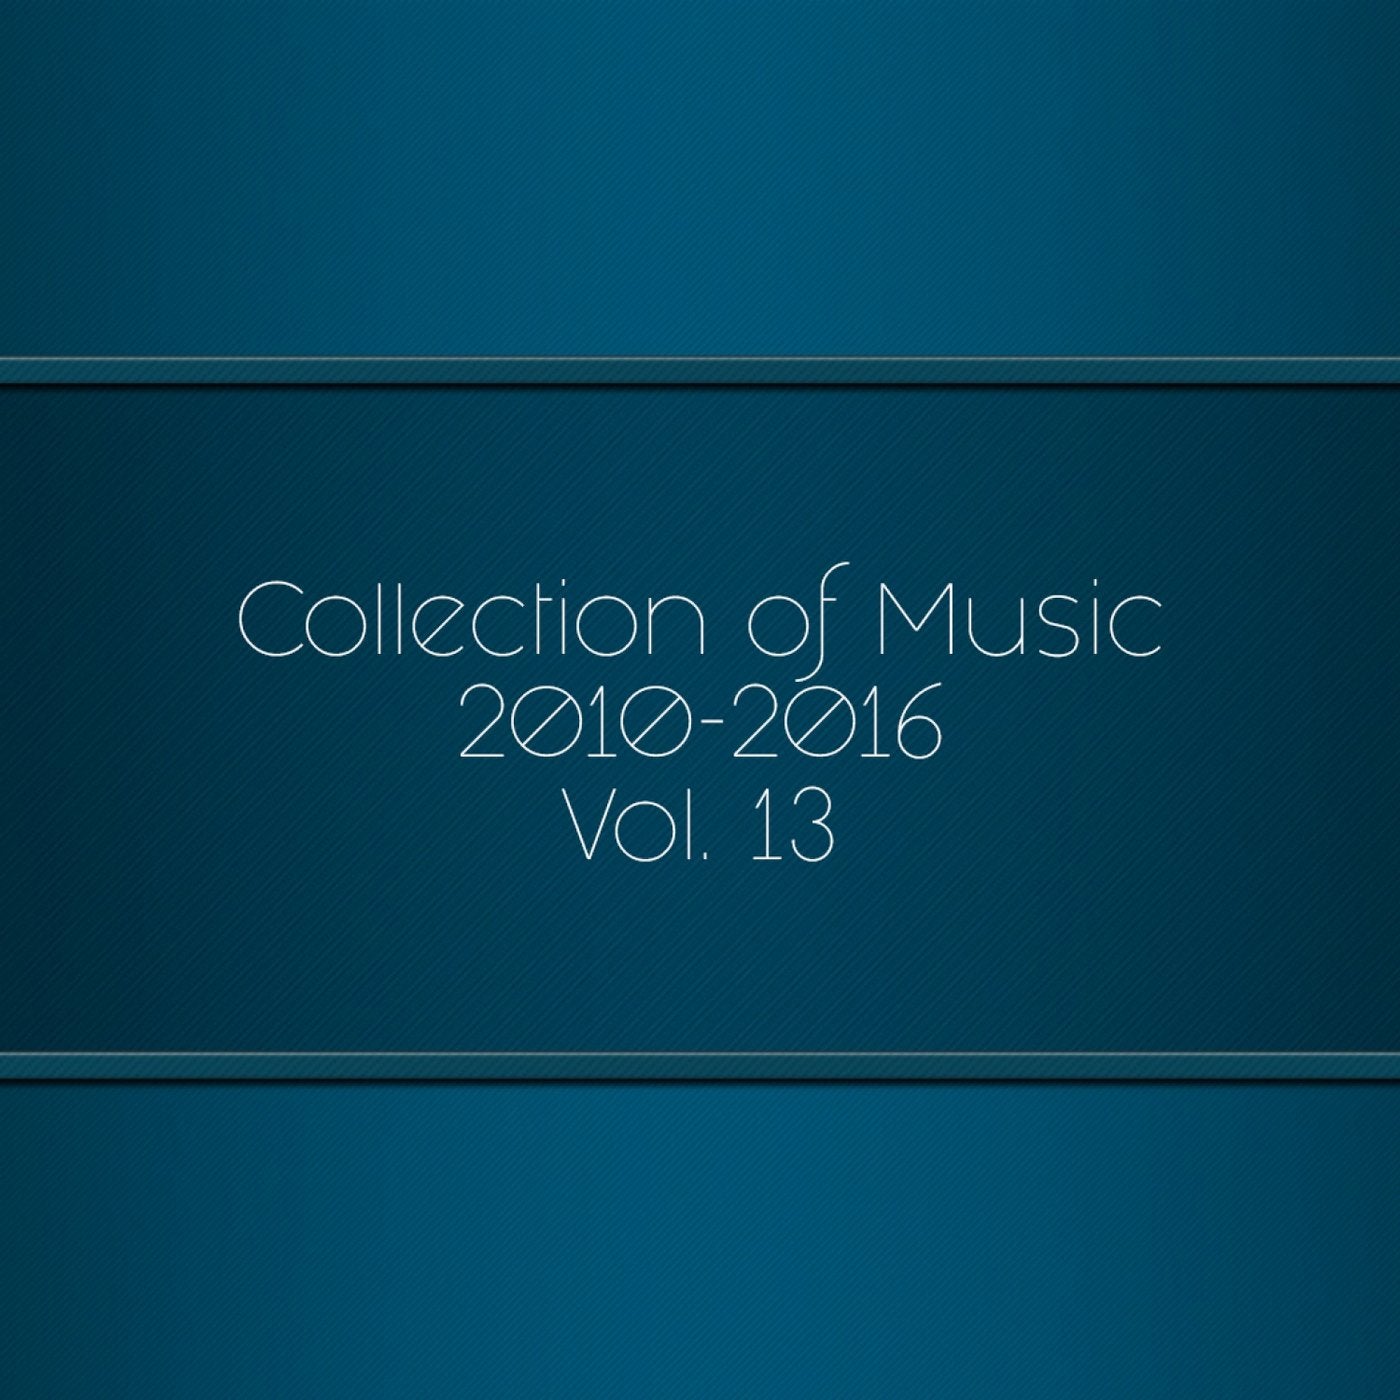 Collection of Music 2010-2016, Vol. 13